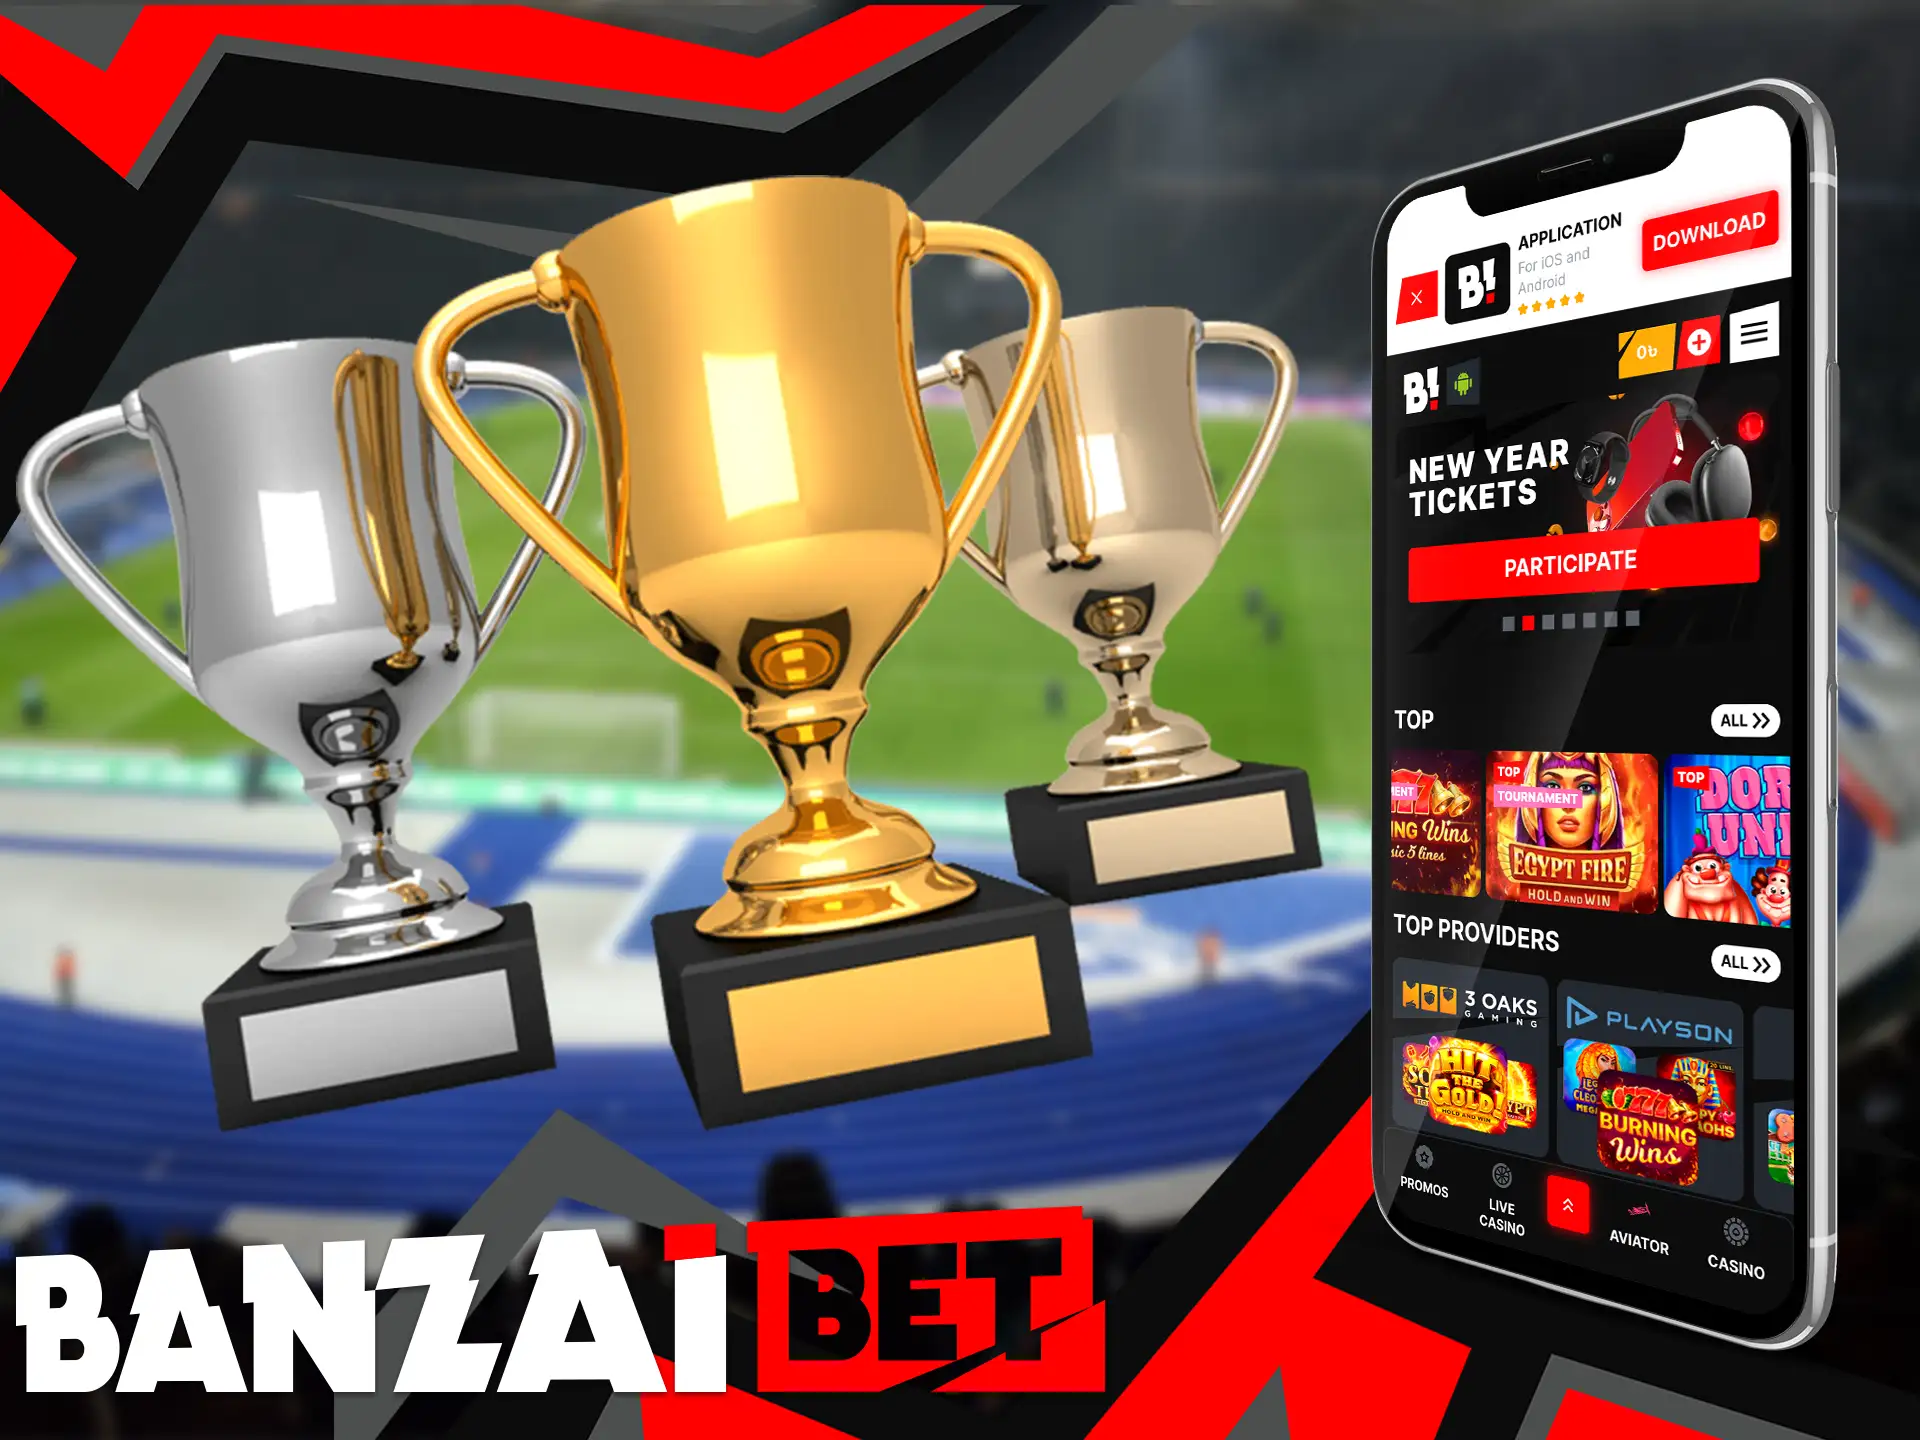 To increase your chances of winning, your choice should be centered on Banzai Bet, it offers high odds.